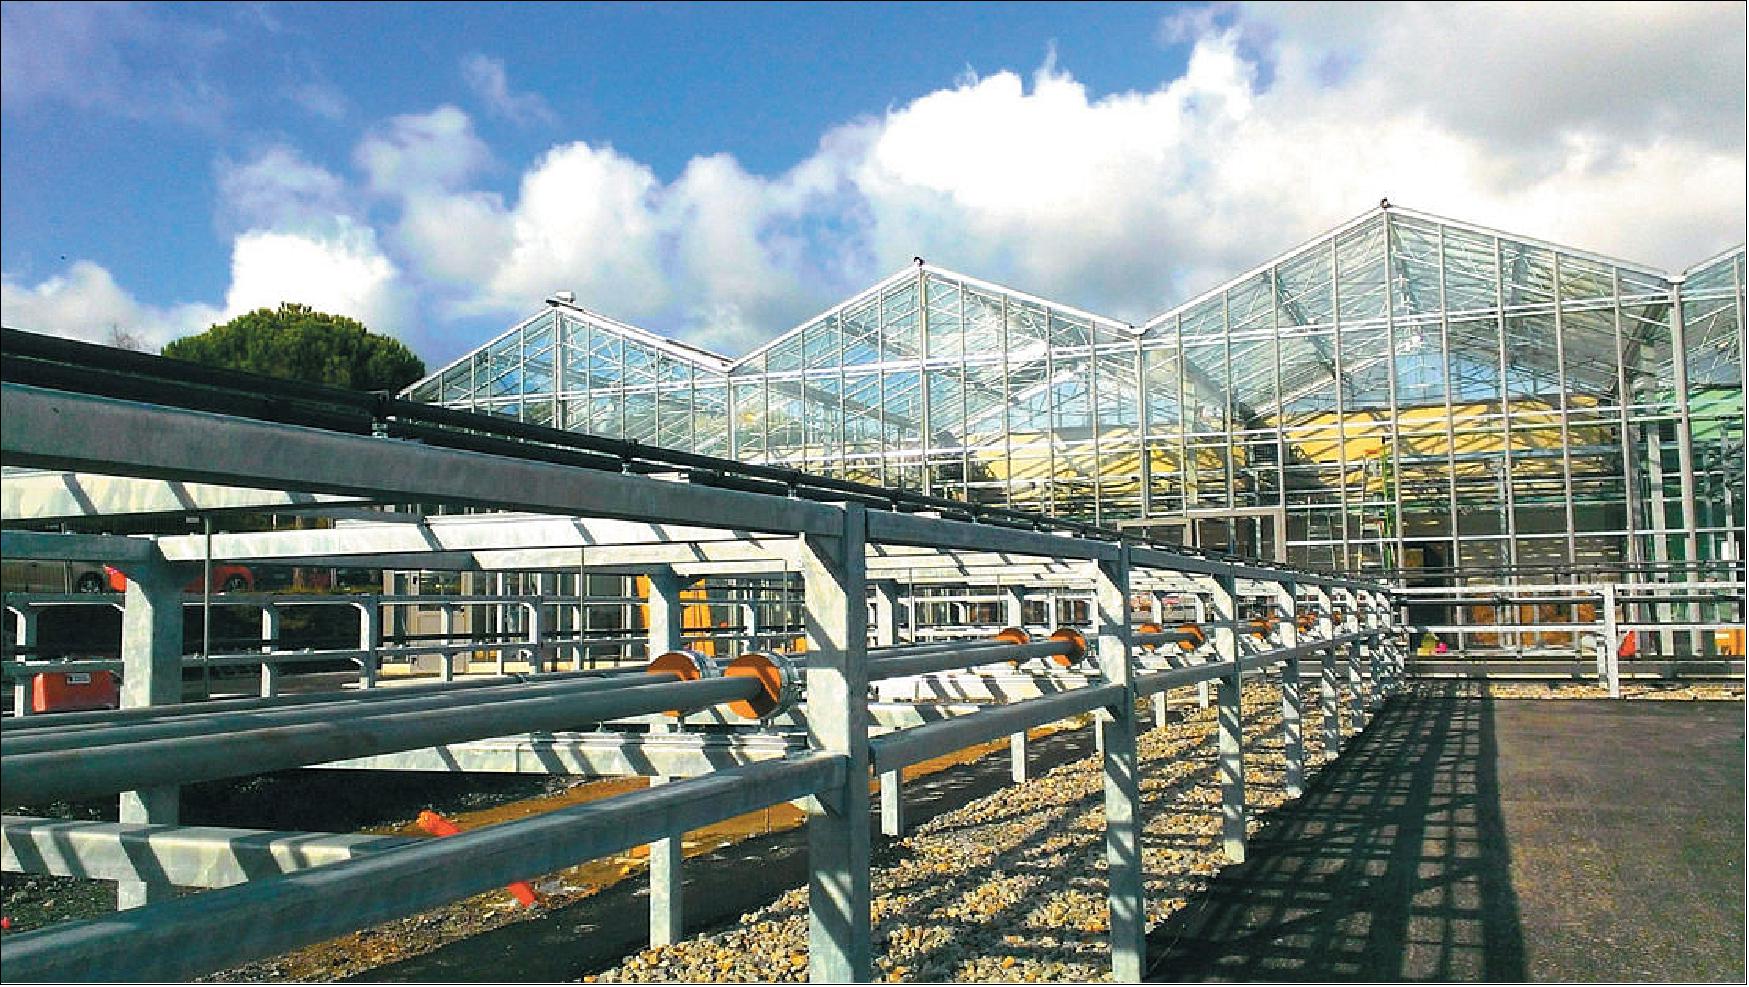 Figure 98: The AlgoSolis facility is offering researchers and industry an opportunity to experiment with microalgae on larger scales than before. Based in Saint-Nazaire, France, the site is a stepping stone to industrial production of algae-based products (image credit: Université de Nantes) 115)